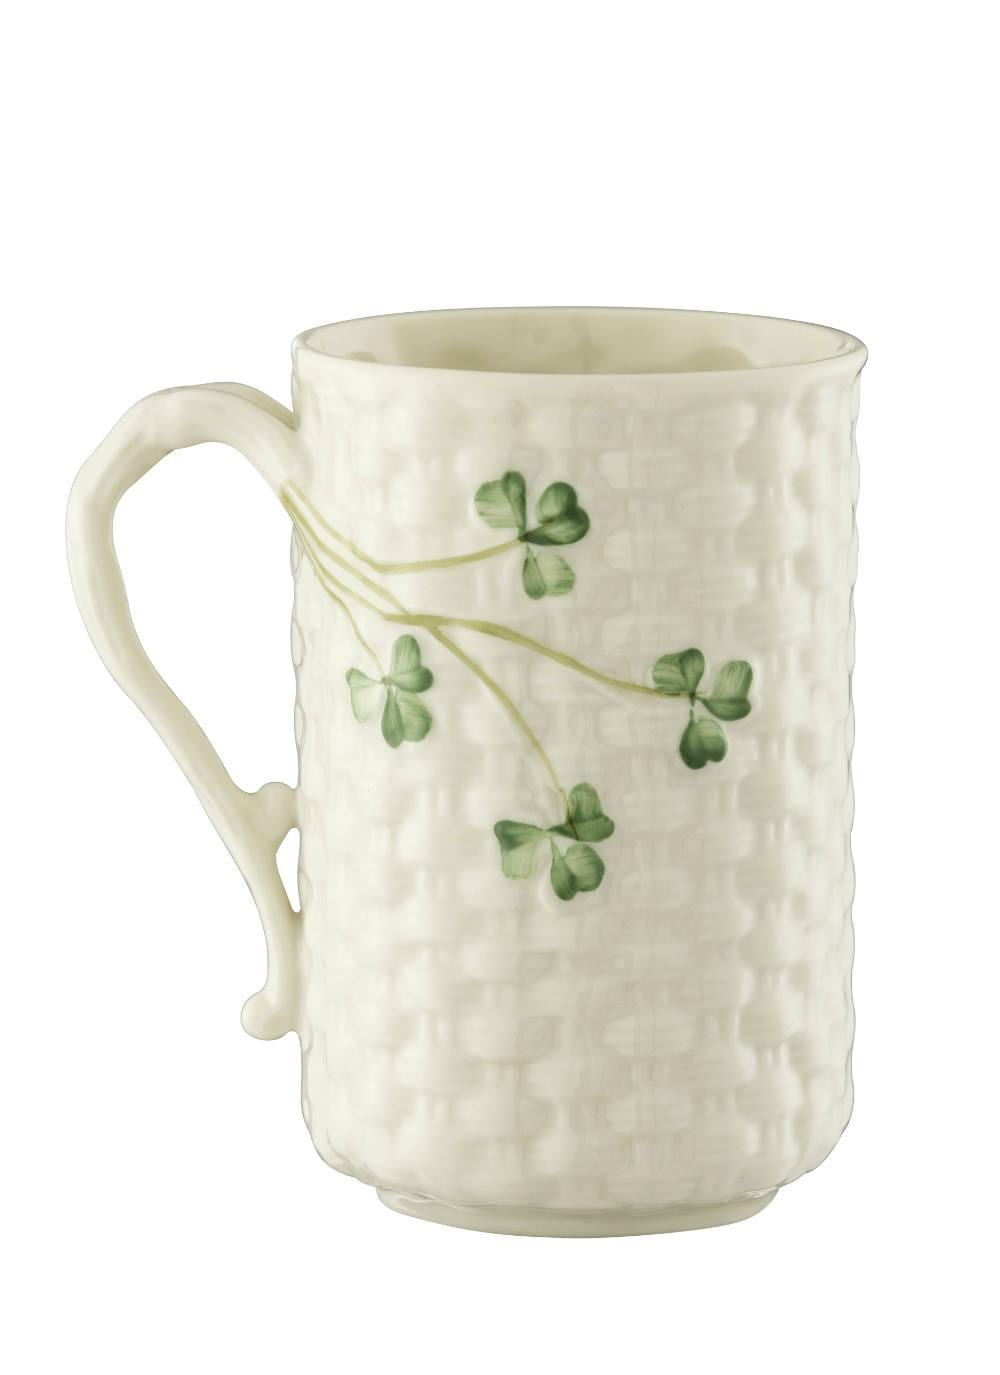 The Belleek Classic Gaelic Coffee Mug: A Touch of Irish Heritage For Your Morning Coffee